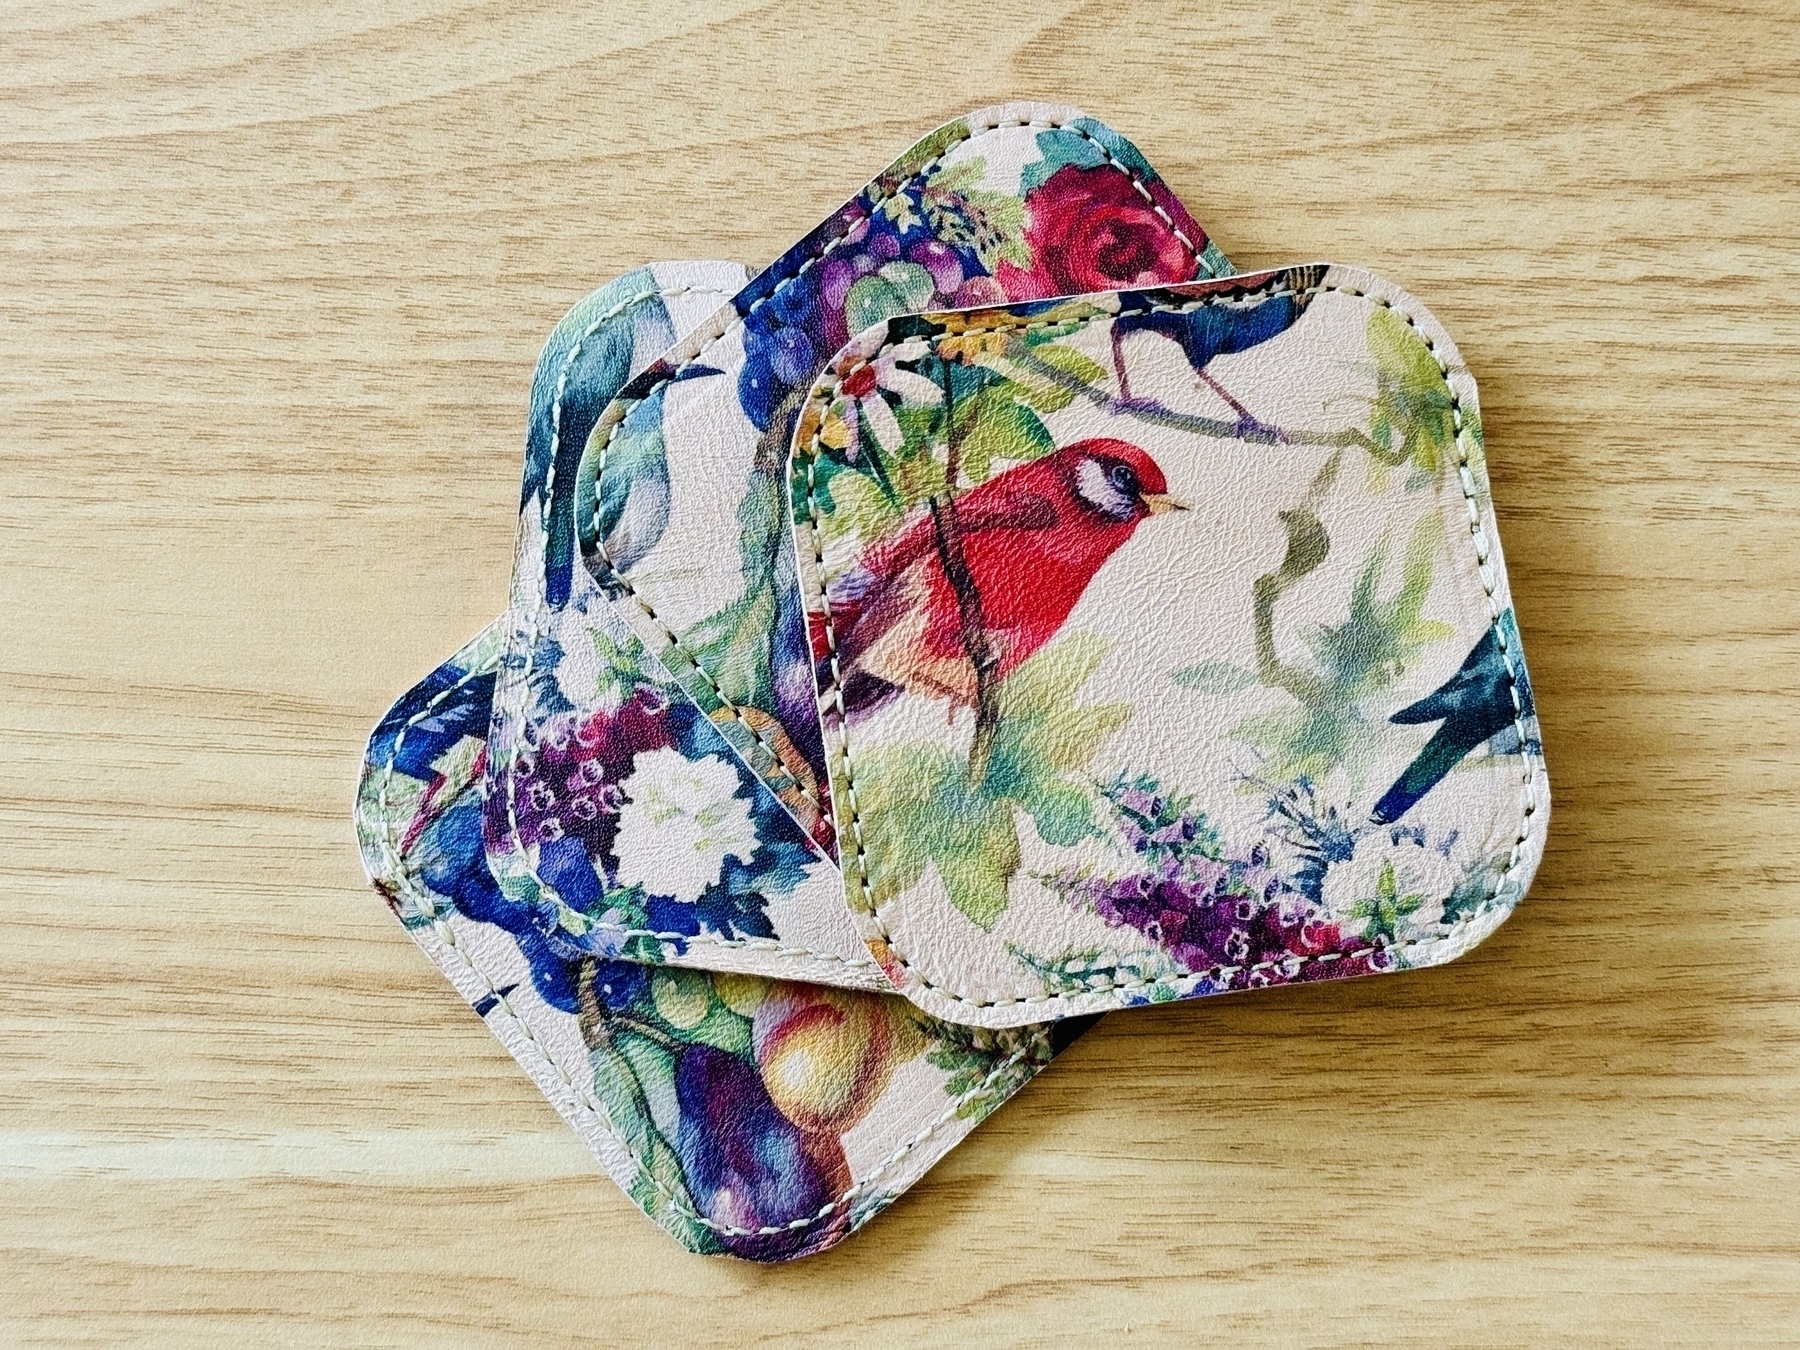 Four printed vet-tan sheepskin leather coasters, birds and flowers in a colorful symphony adorn.